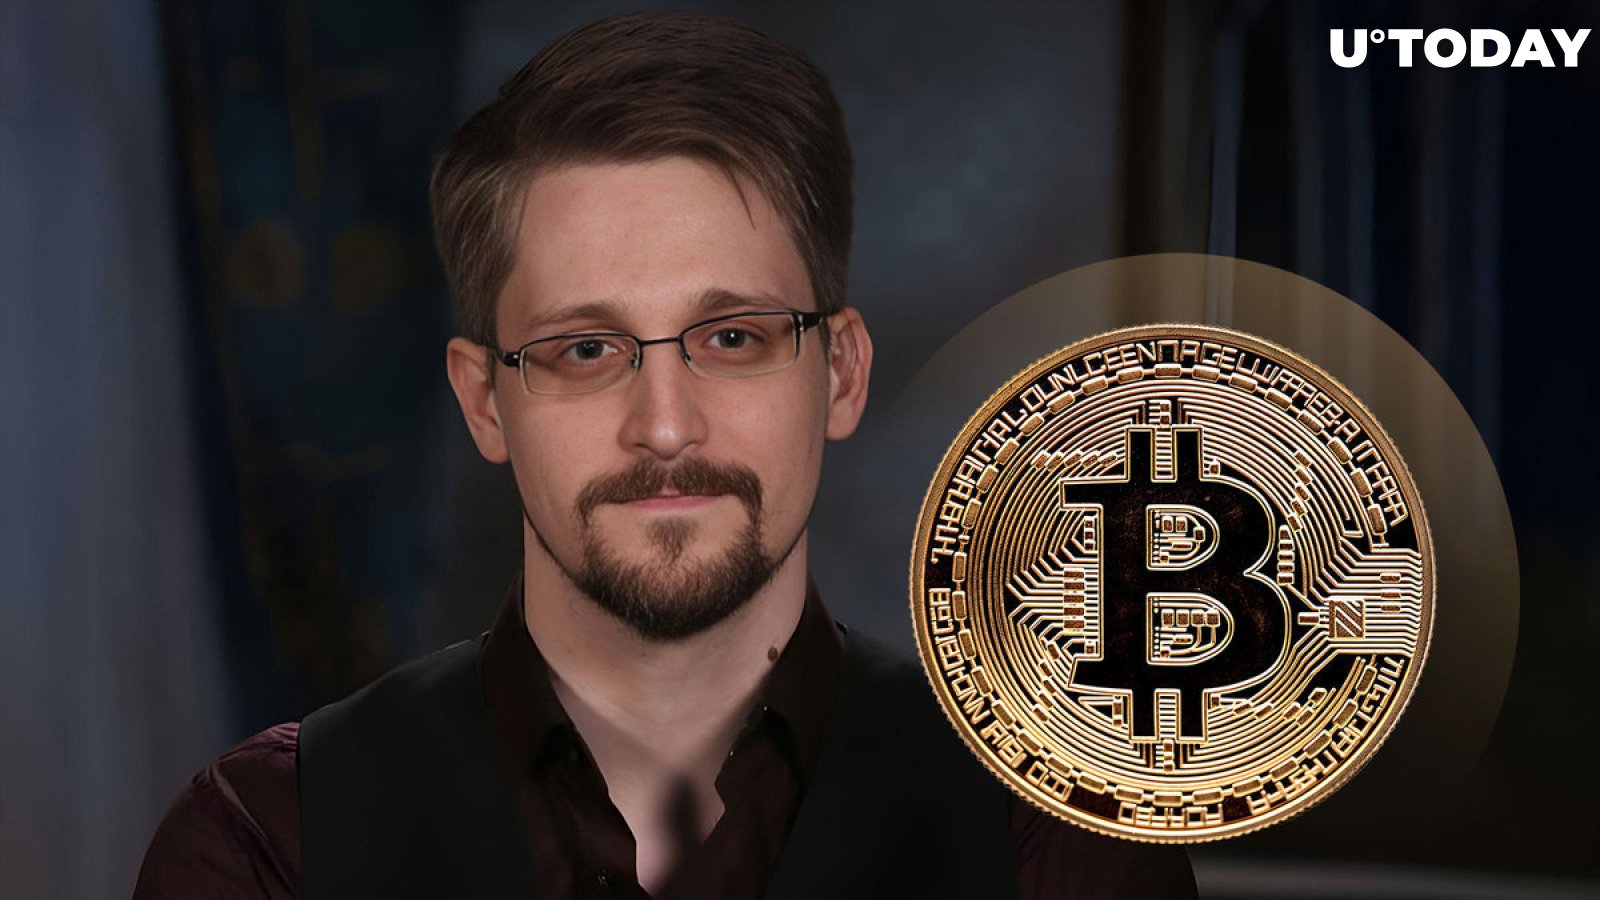 Edward Snowden Issues Crucial OpenAI and ChatGPT Statement: “You've Been Warned”